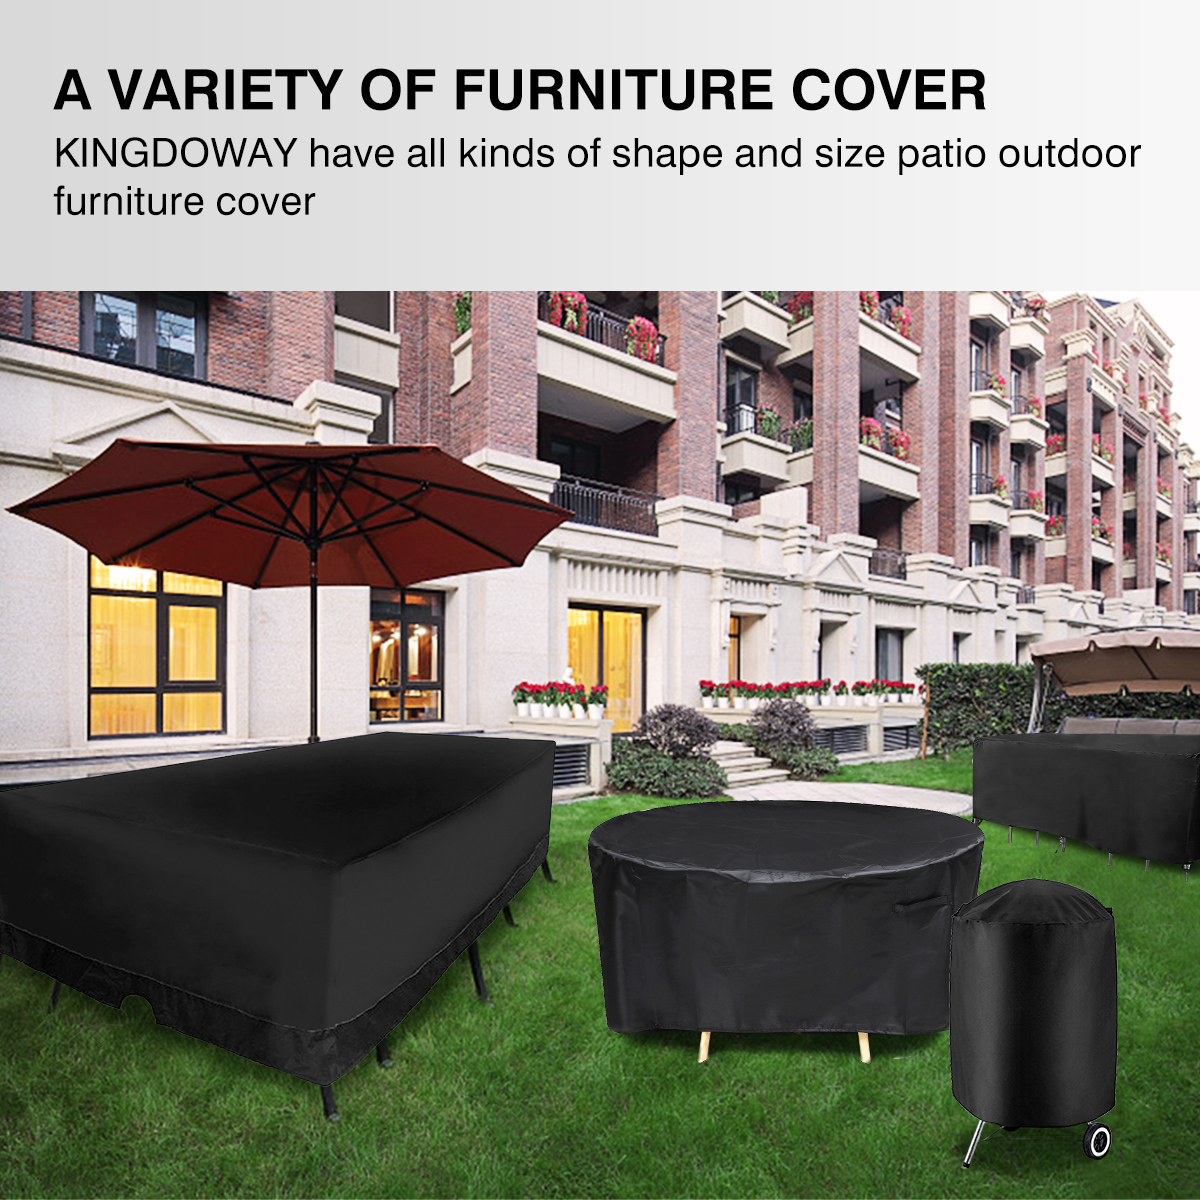 KING-DO-WAY-Outdoor-Patio-Furniture-Covers-Waterproof-Breathable-420D-Oxford-Fabric-with-4-Windproof-1540876-4